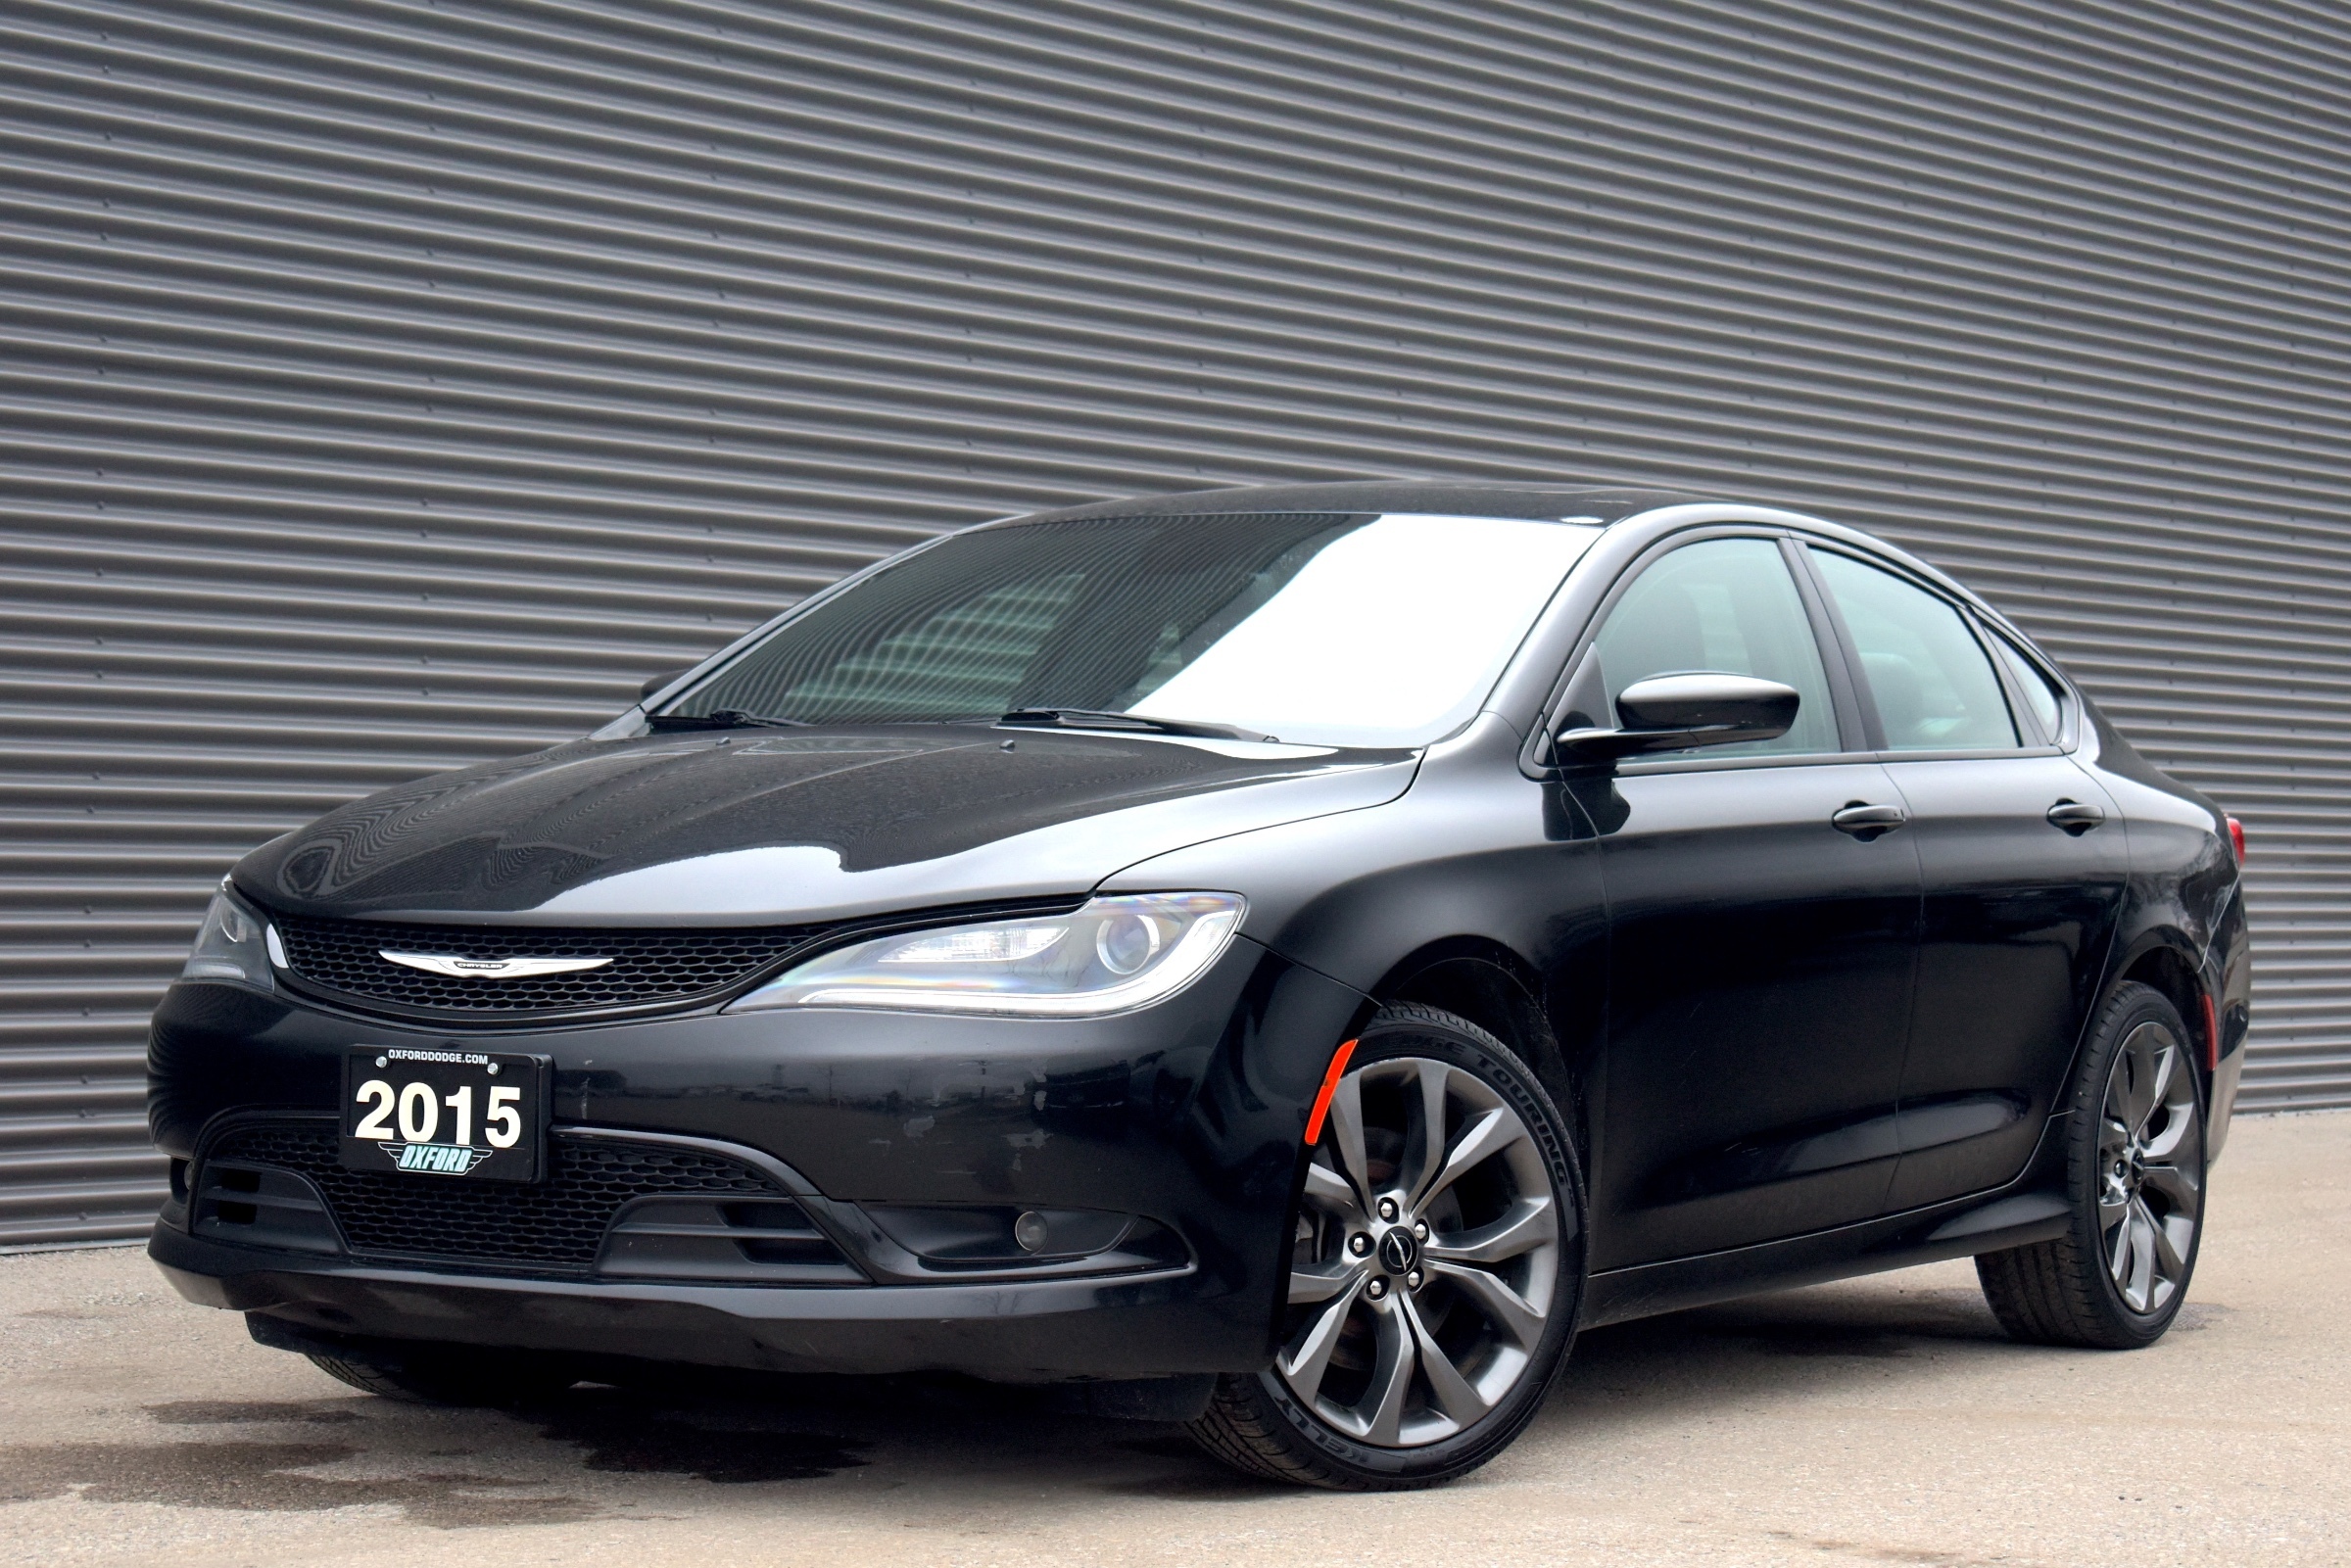 2015 Chrysler 200 S Panoramic Sunroof, Lots Of Space, High Quality I